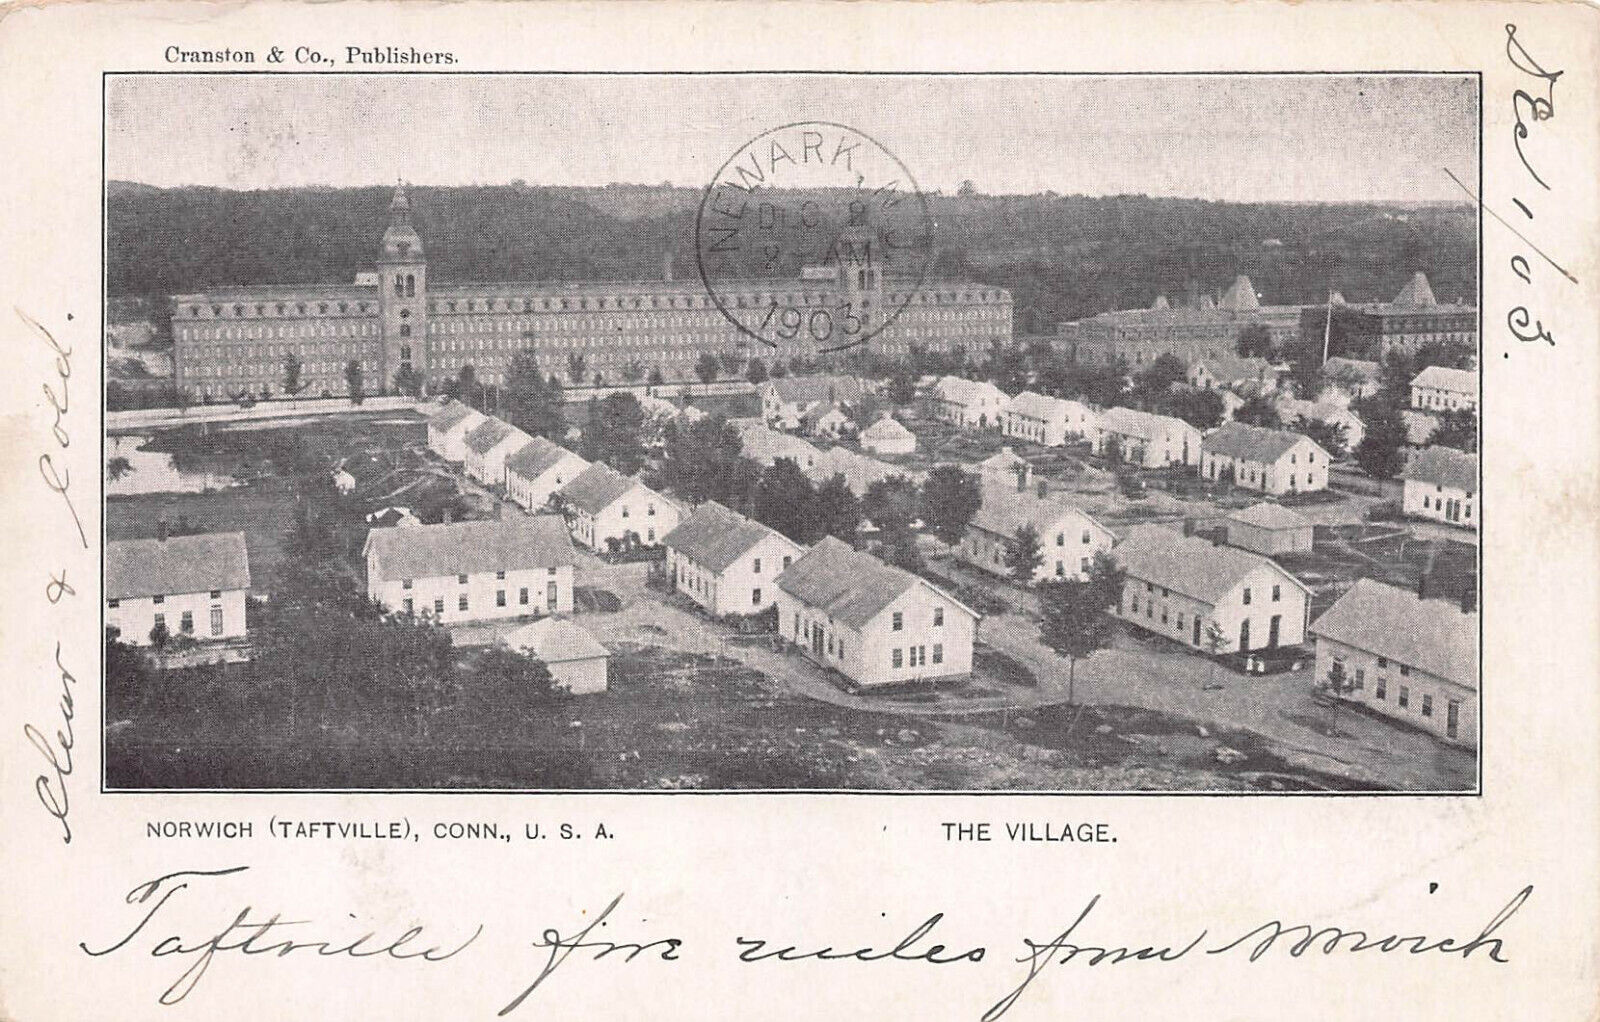 The Village of Norwich, Taftville, Connecticut, 1903 Postcard, Used